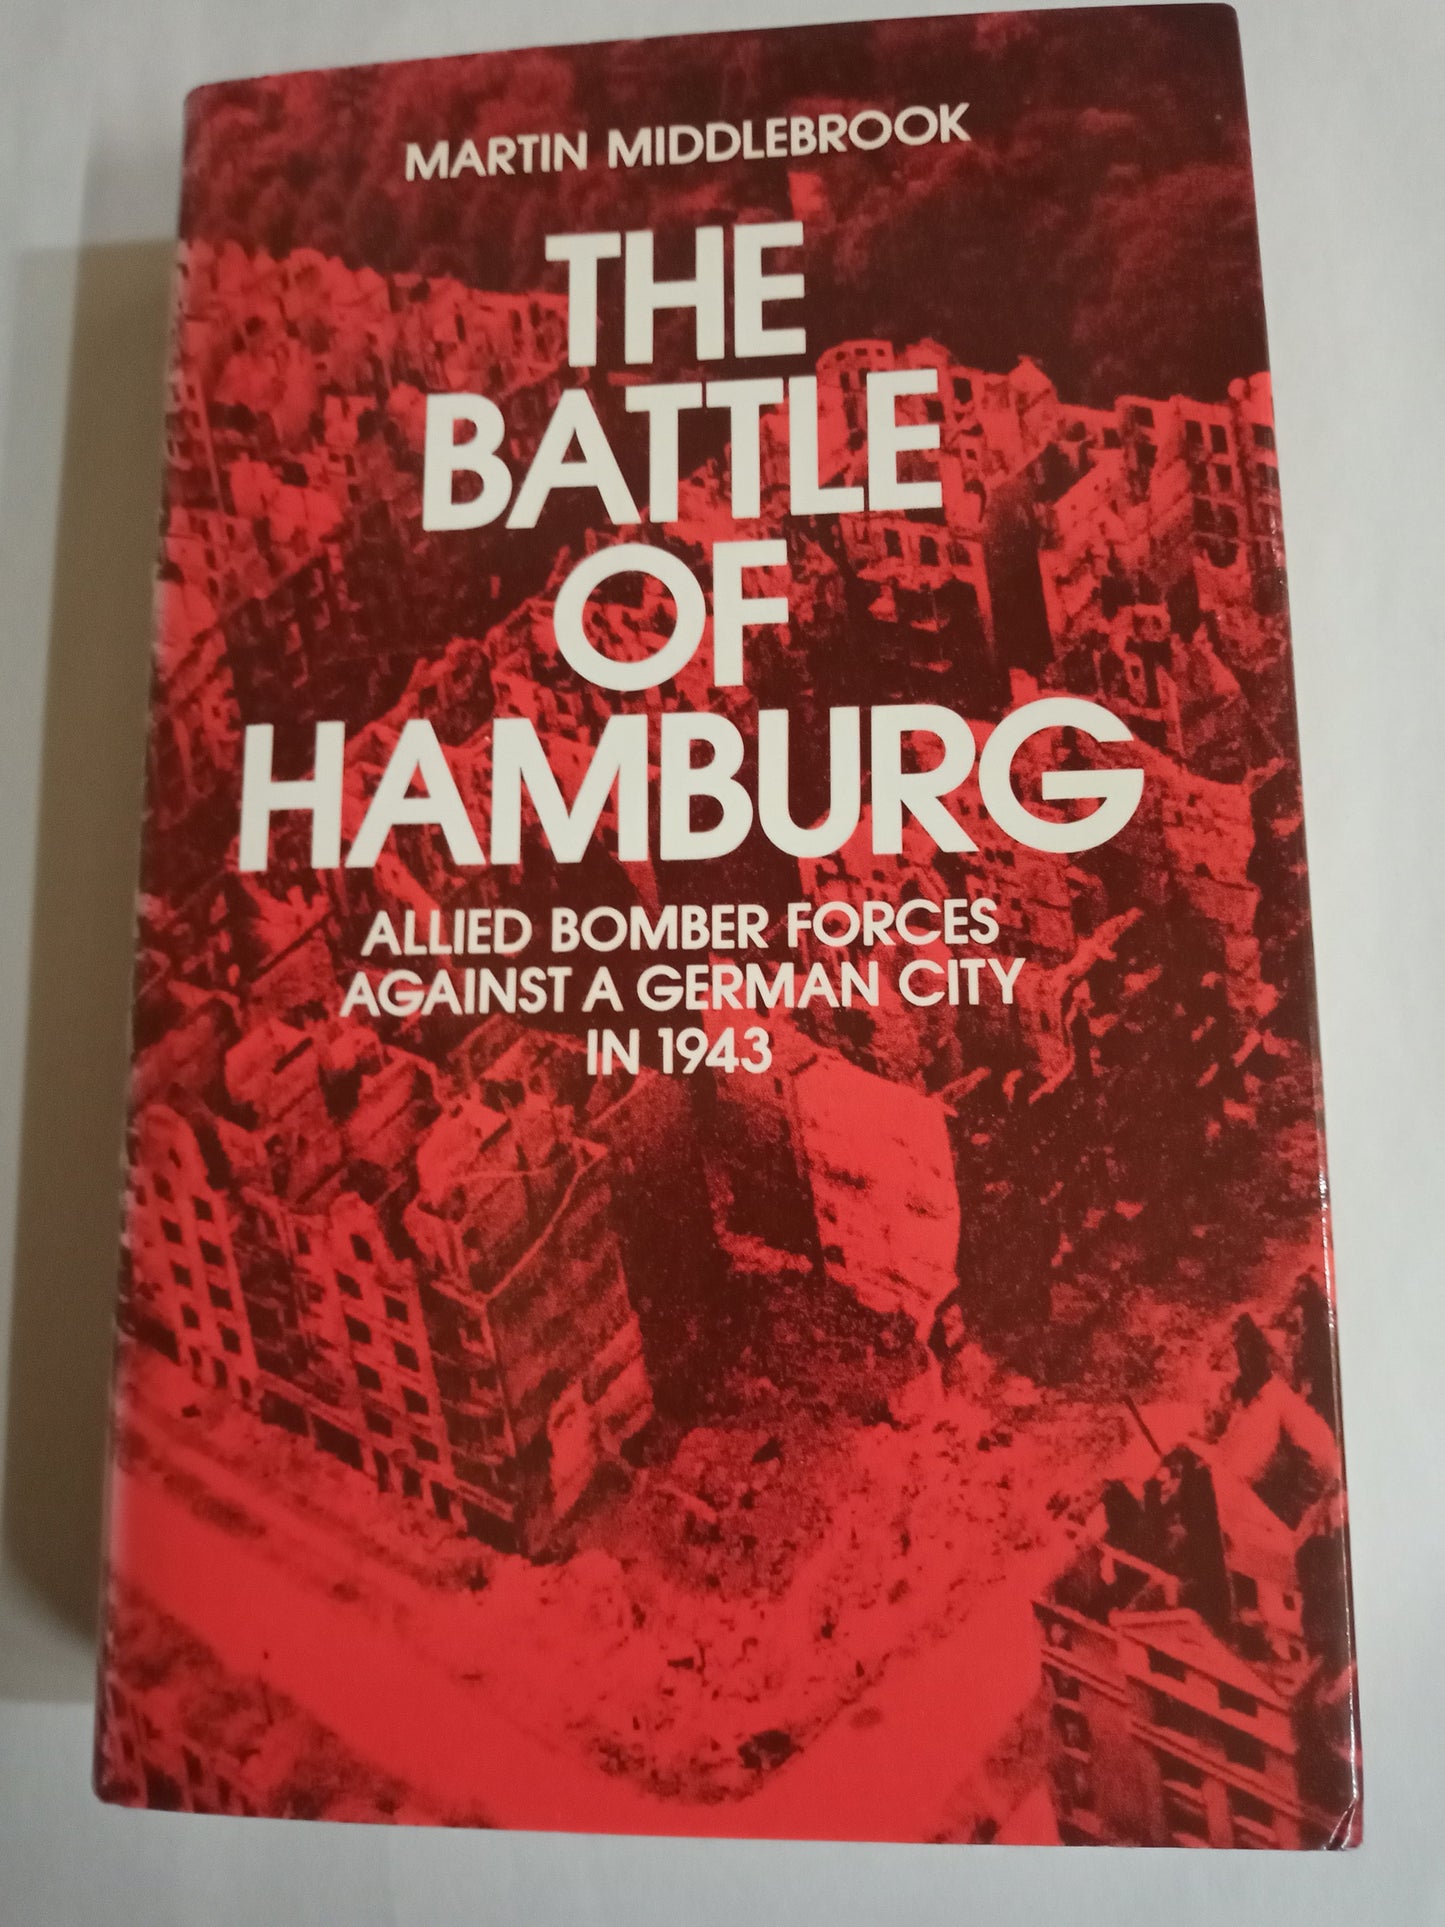 The Battle of Hamburg: Allied bomber forces against a German city in 1943